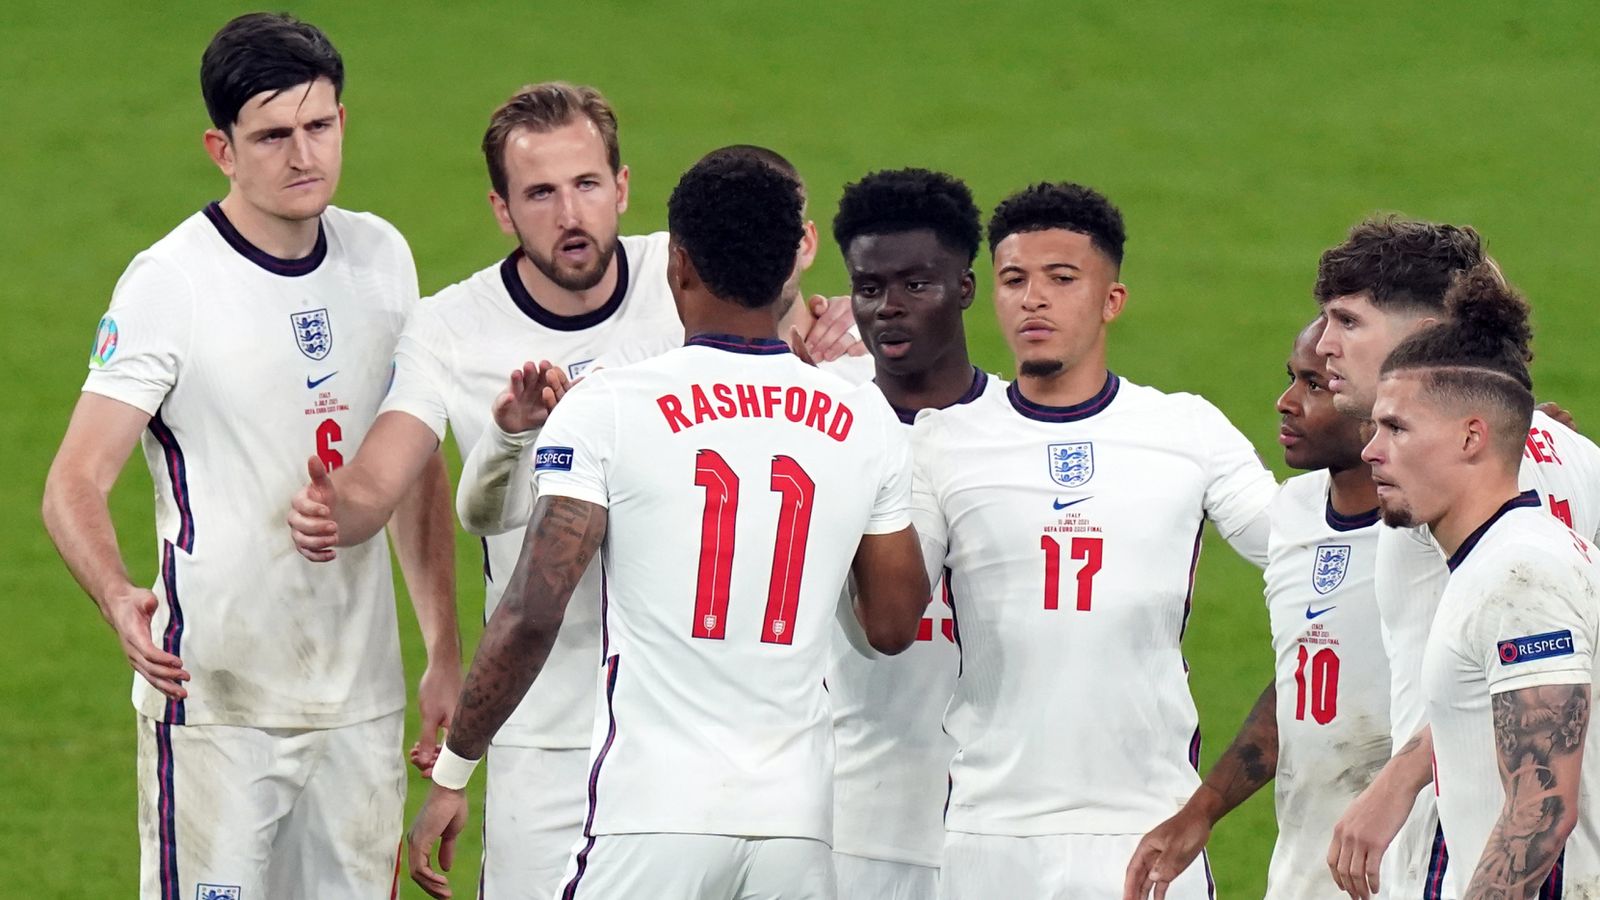 Man given suspended sentence for racially abusing England stars thumbnail